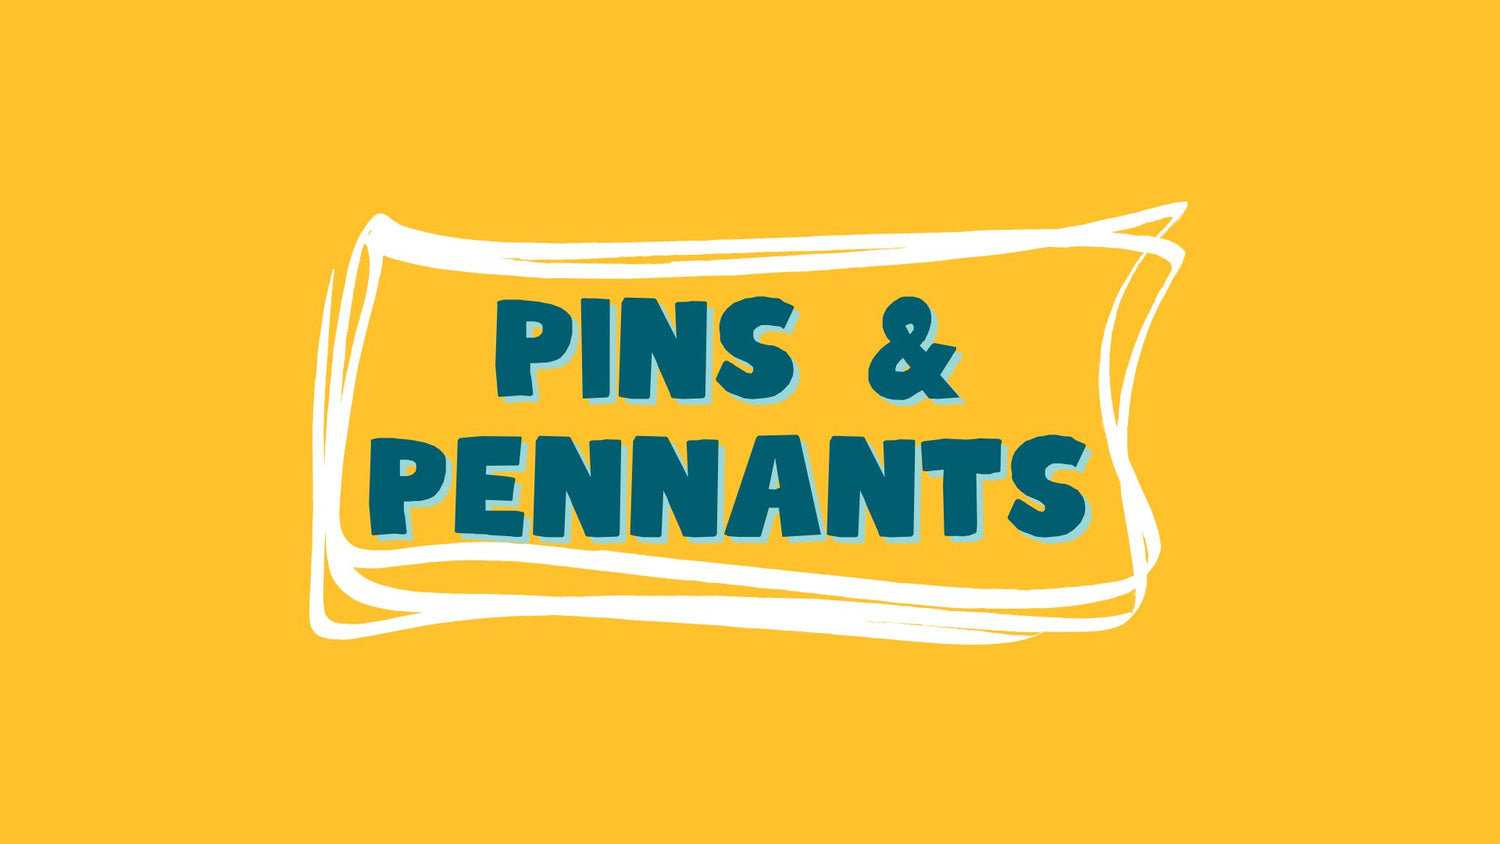 Pins, Pennants & Magnets